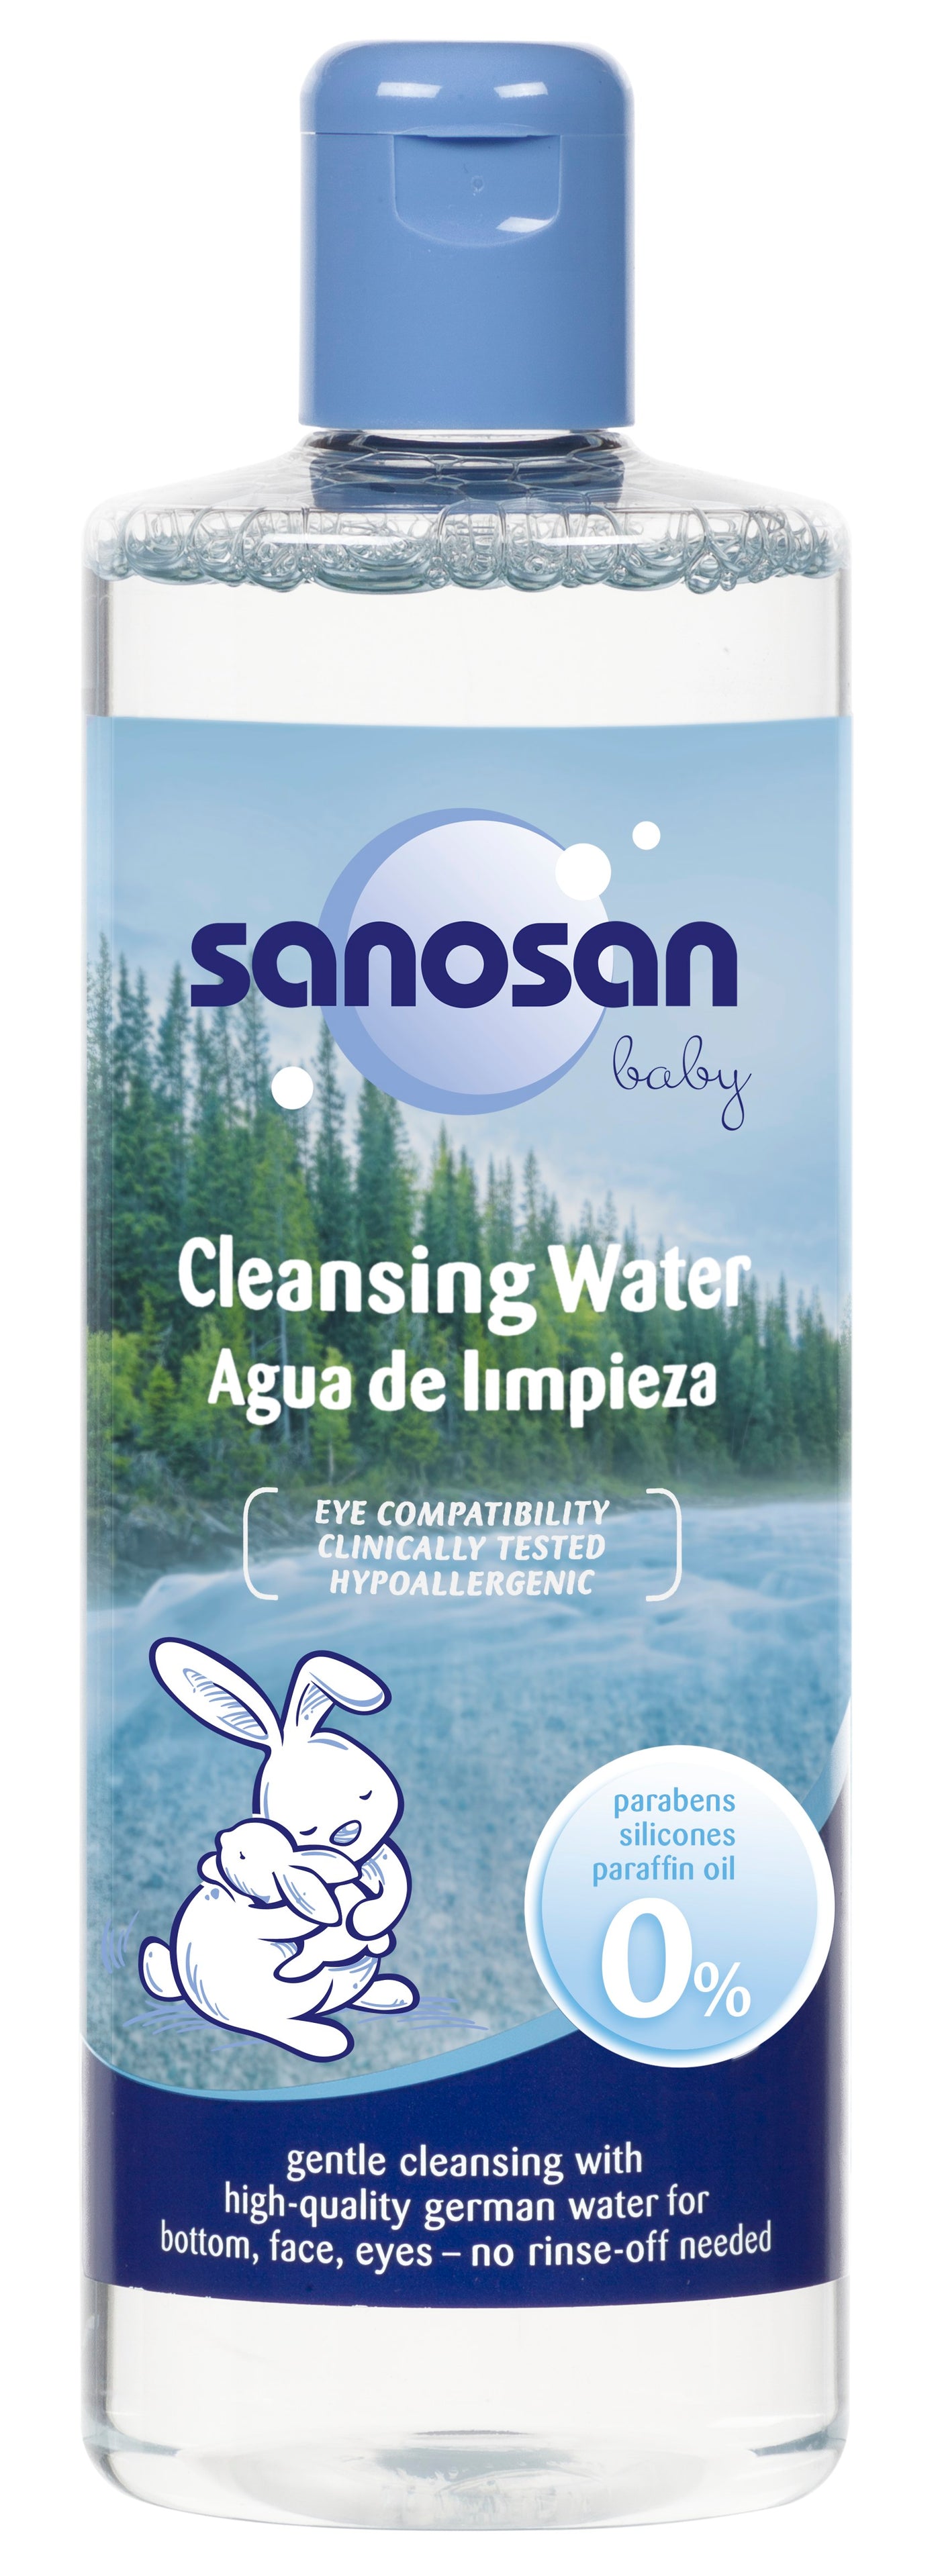 Sanosan cleaning water